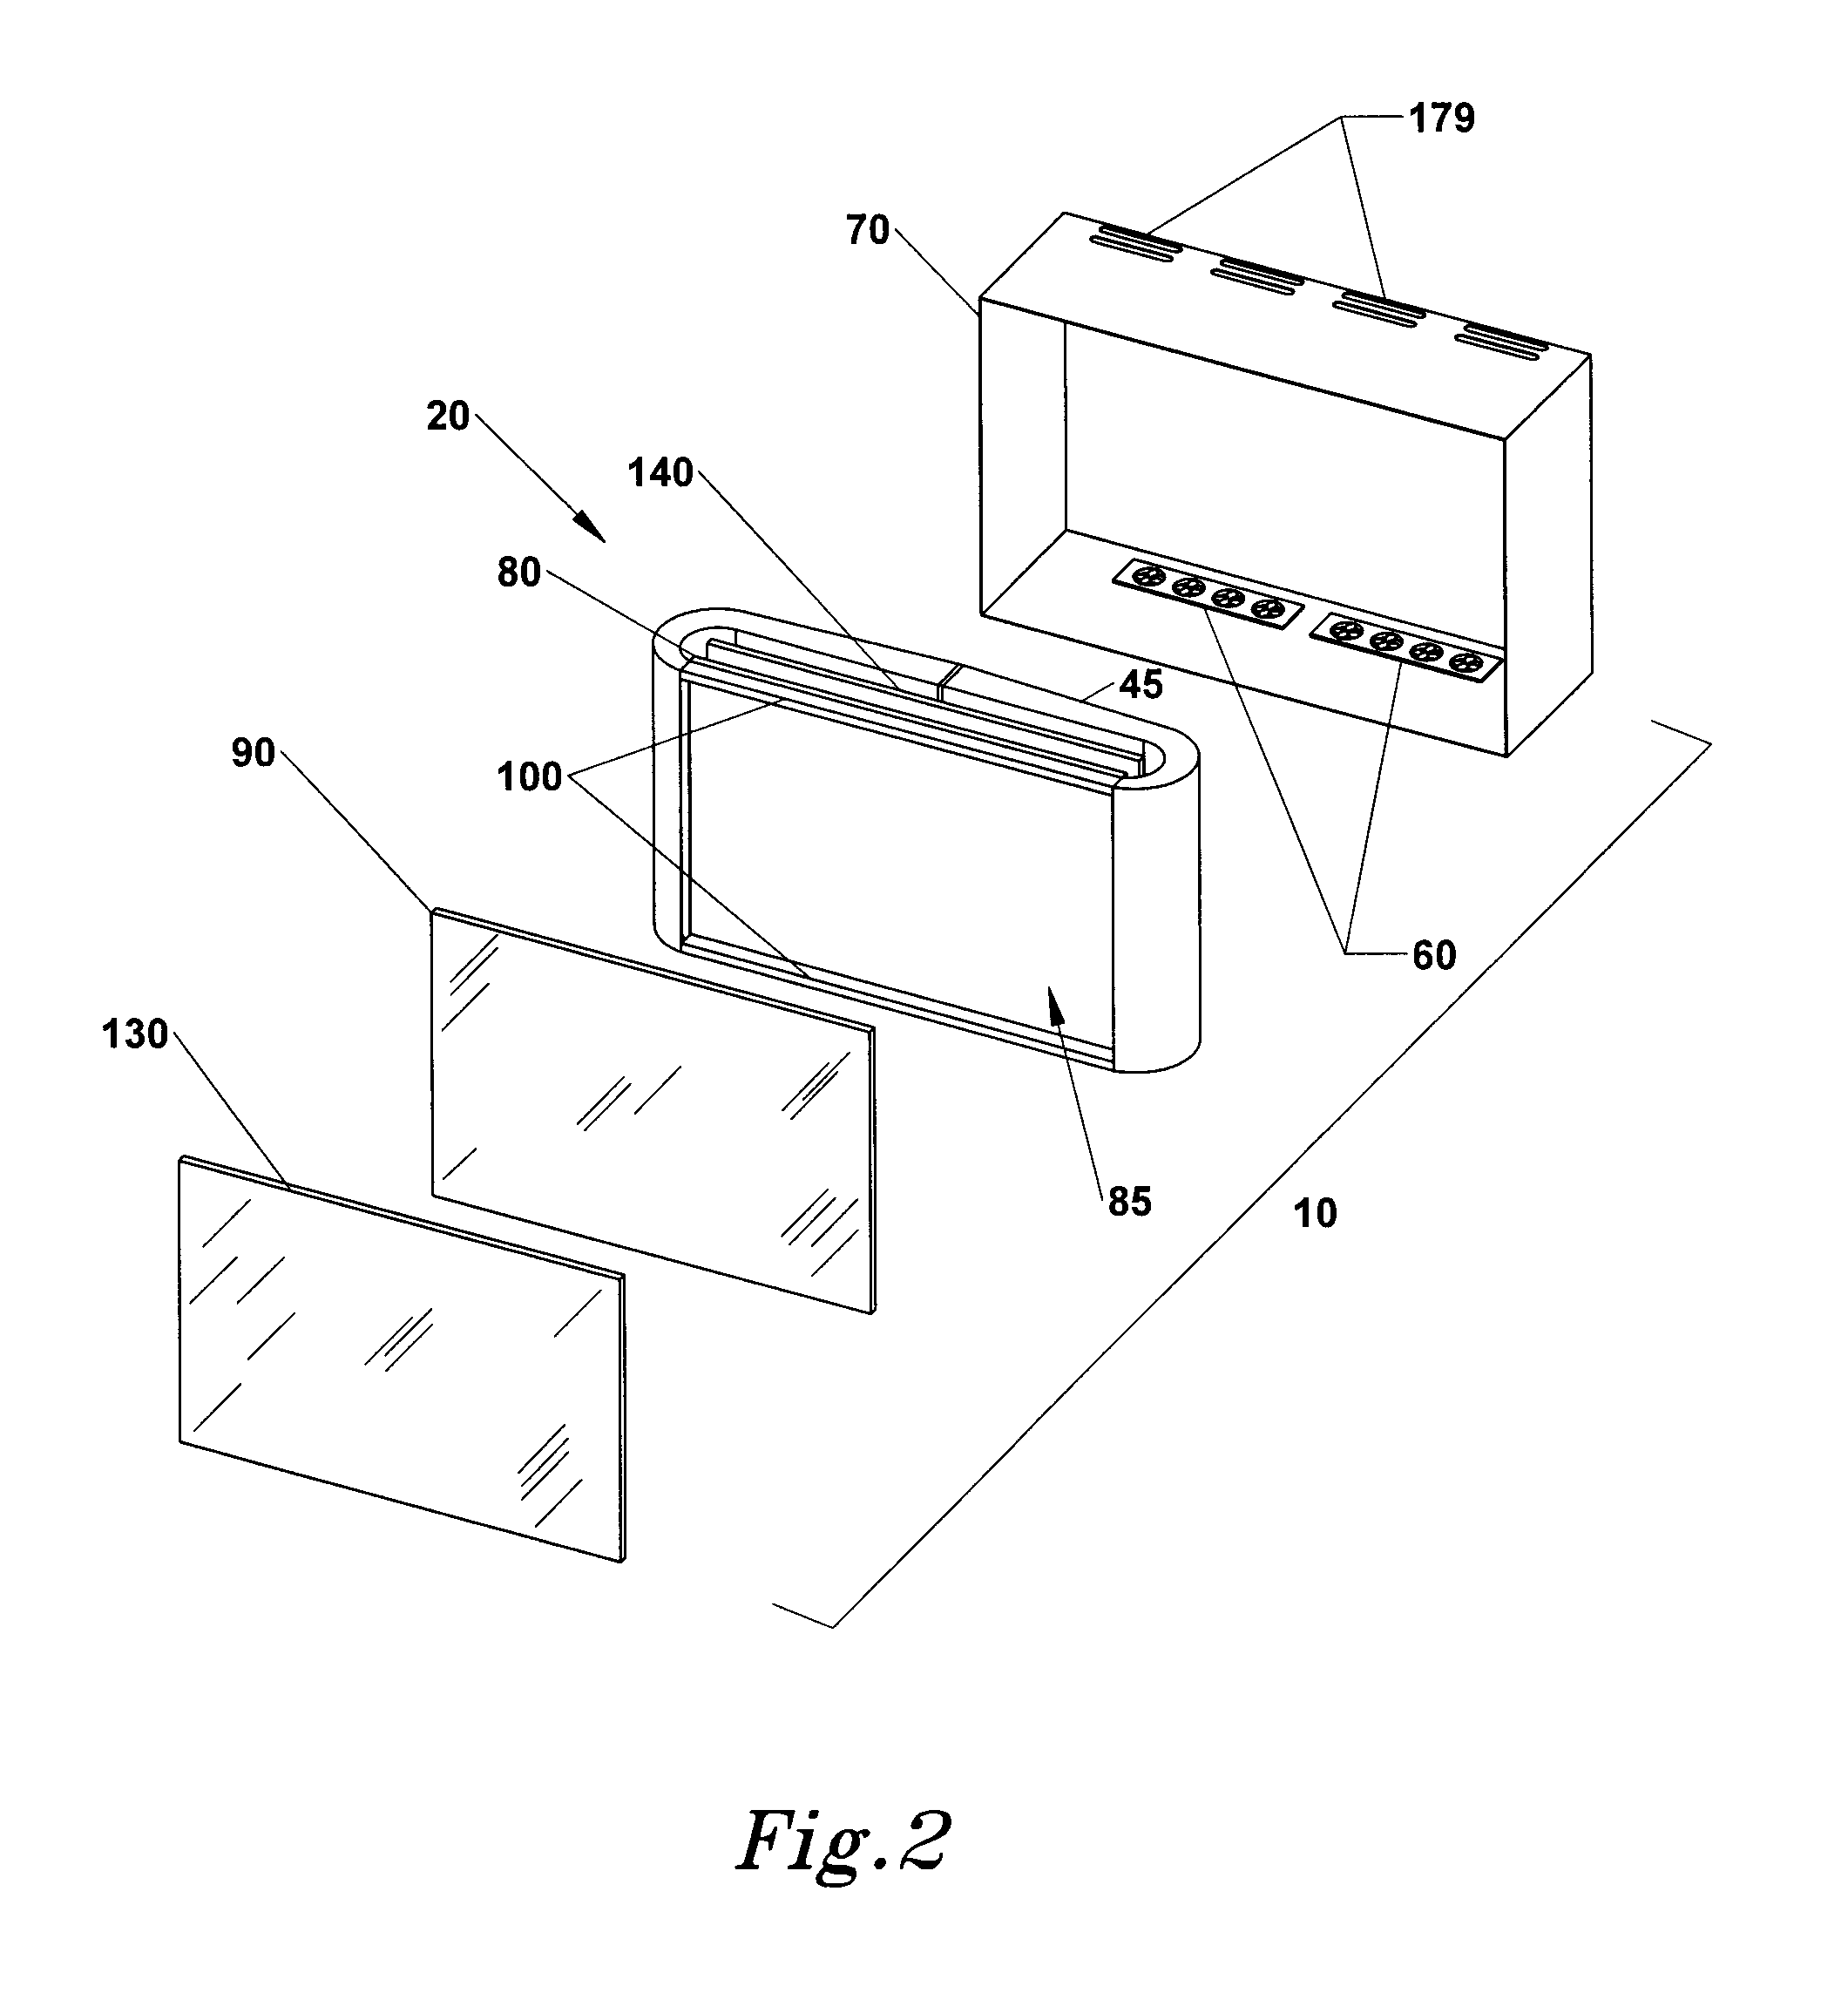 Isolated cooling system having an insulator gap and front polarizer